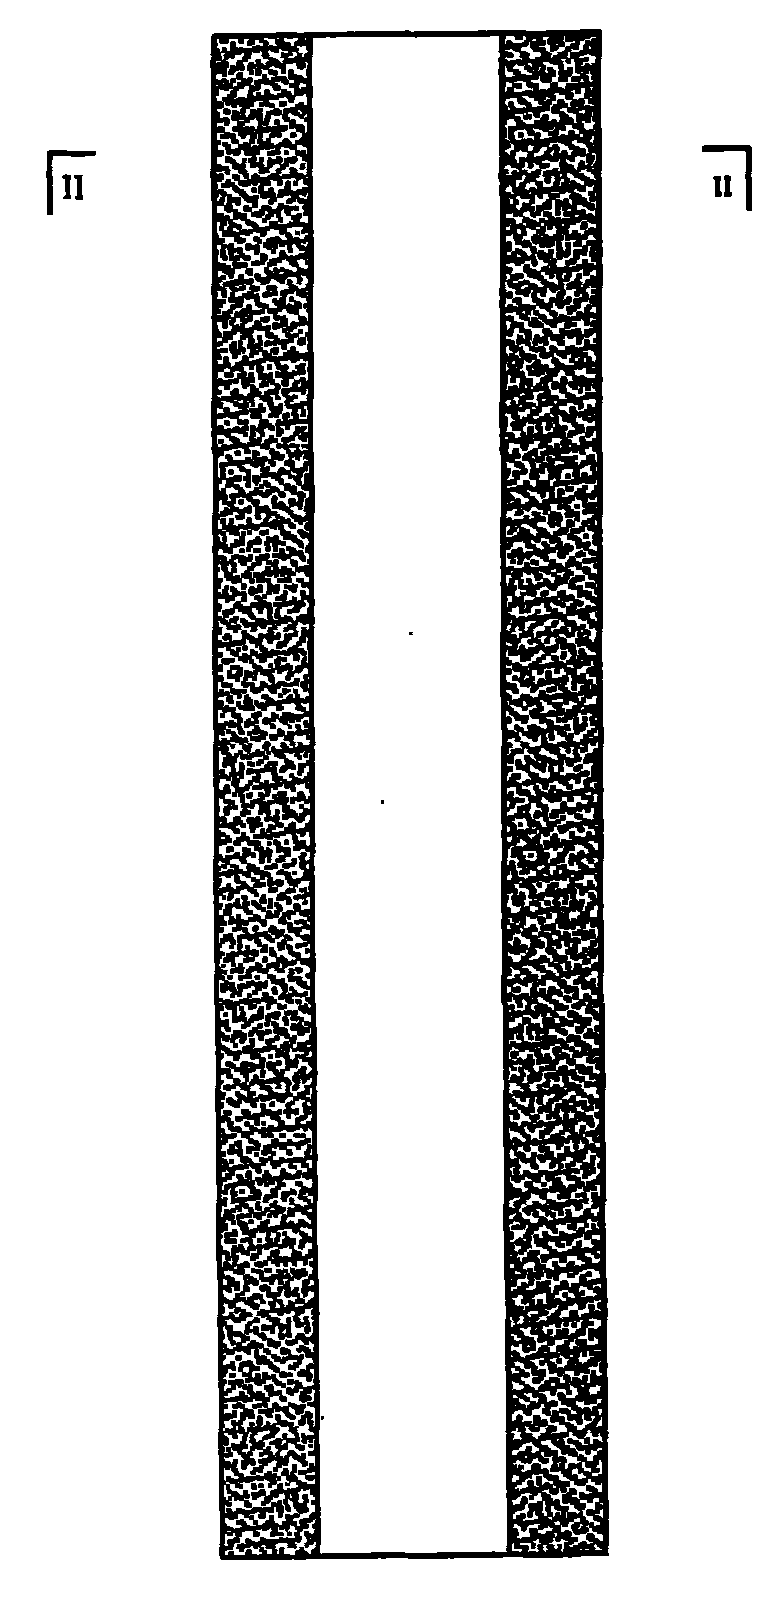 Ceramic filter element and production process thereof